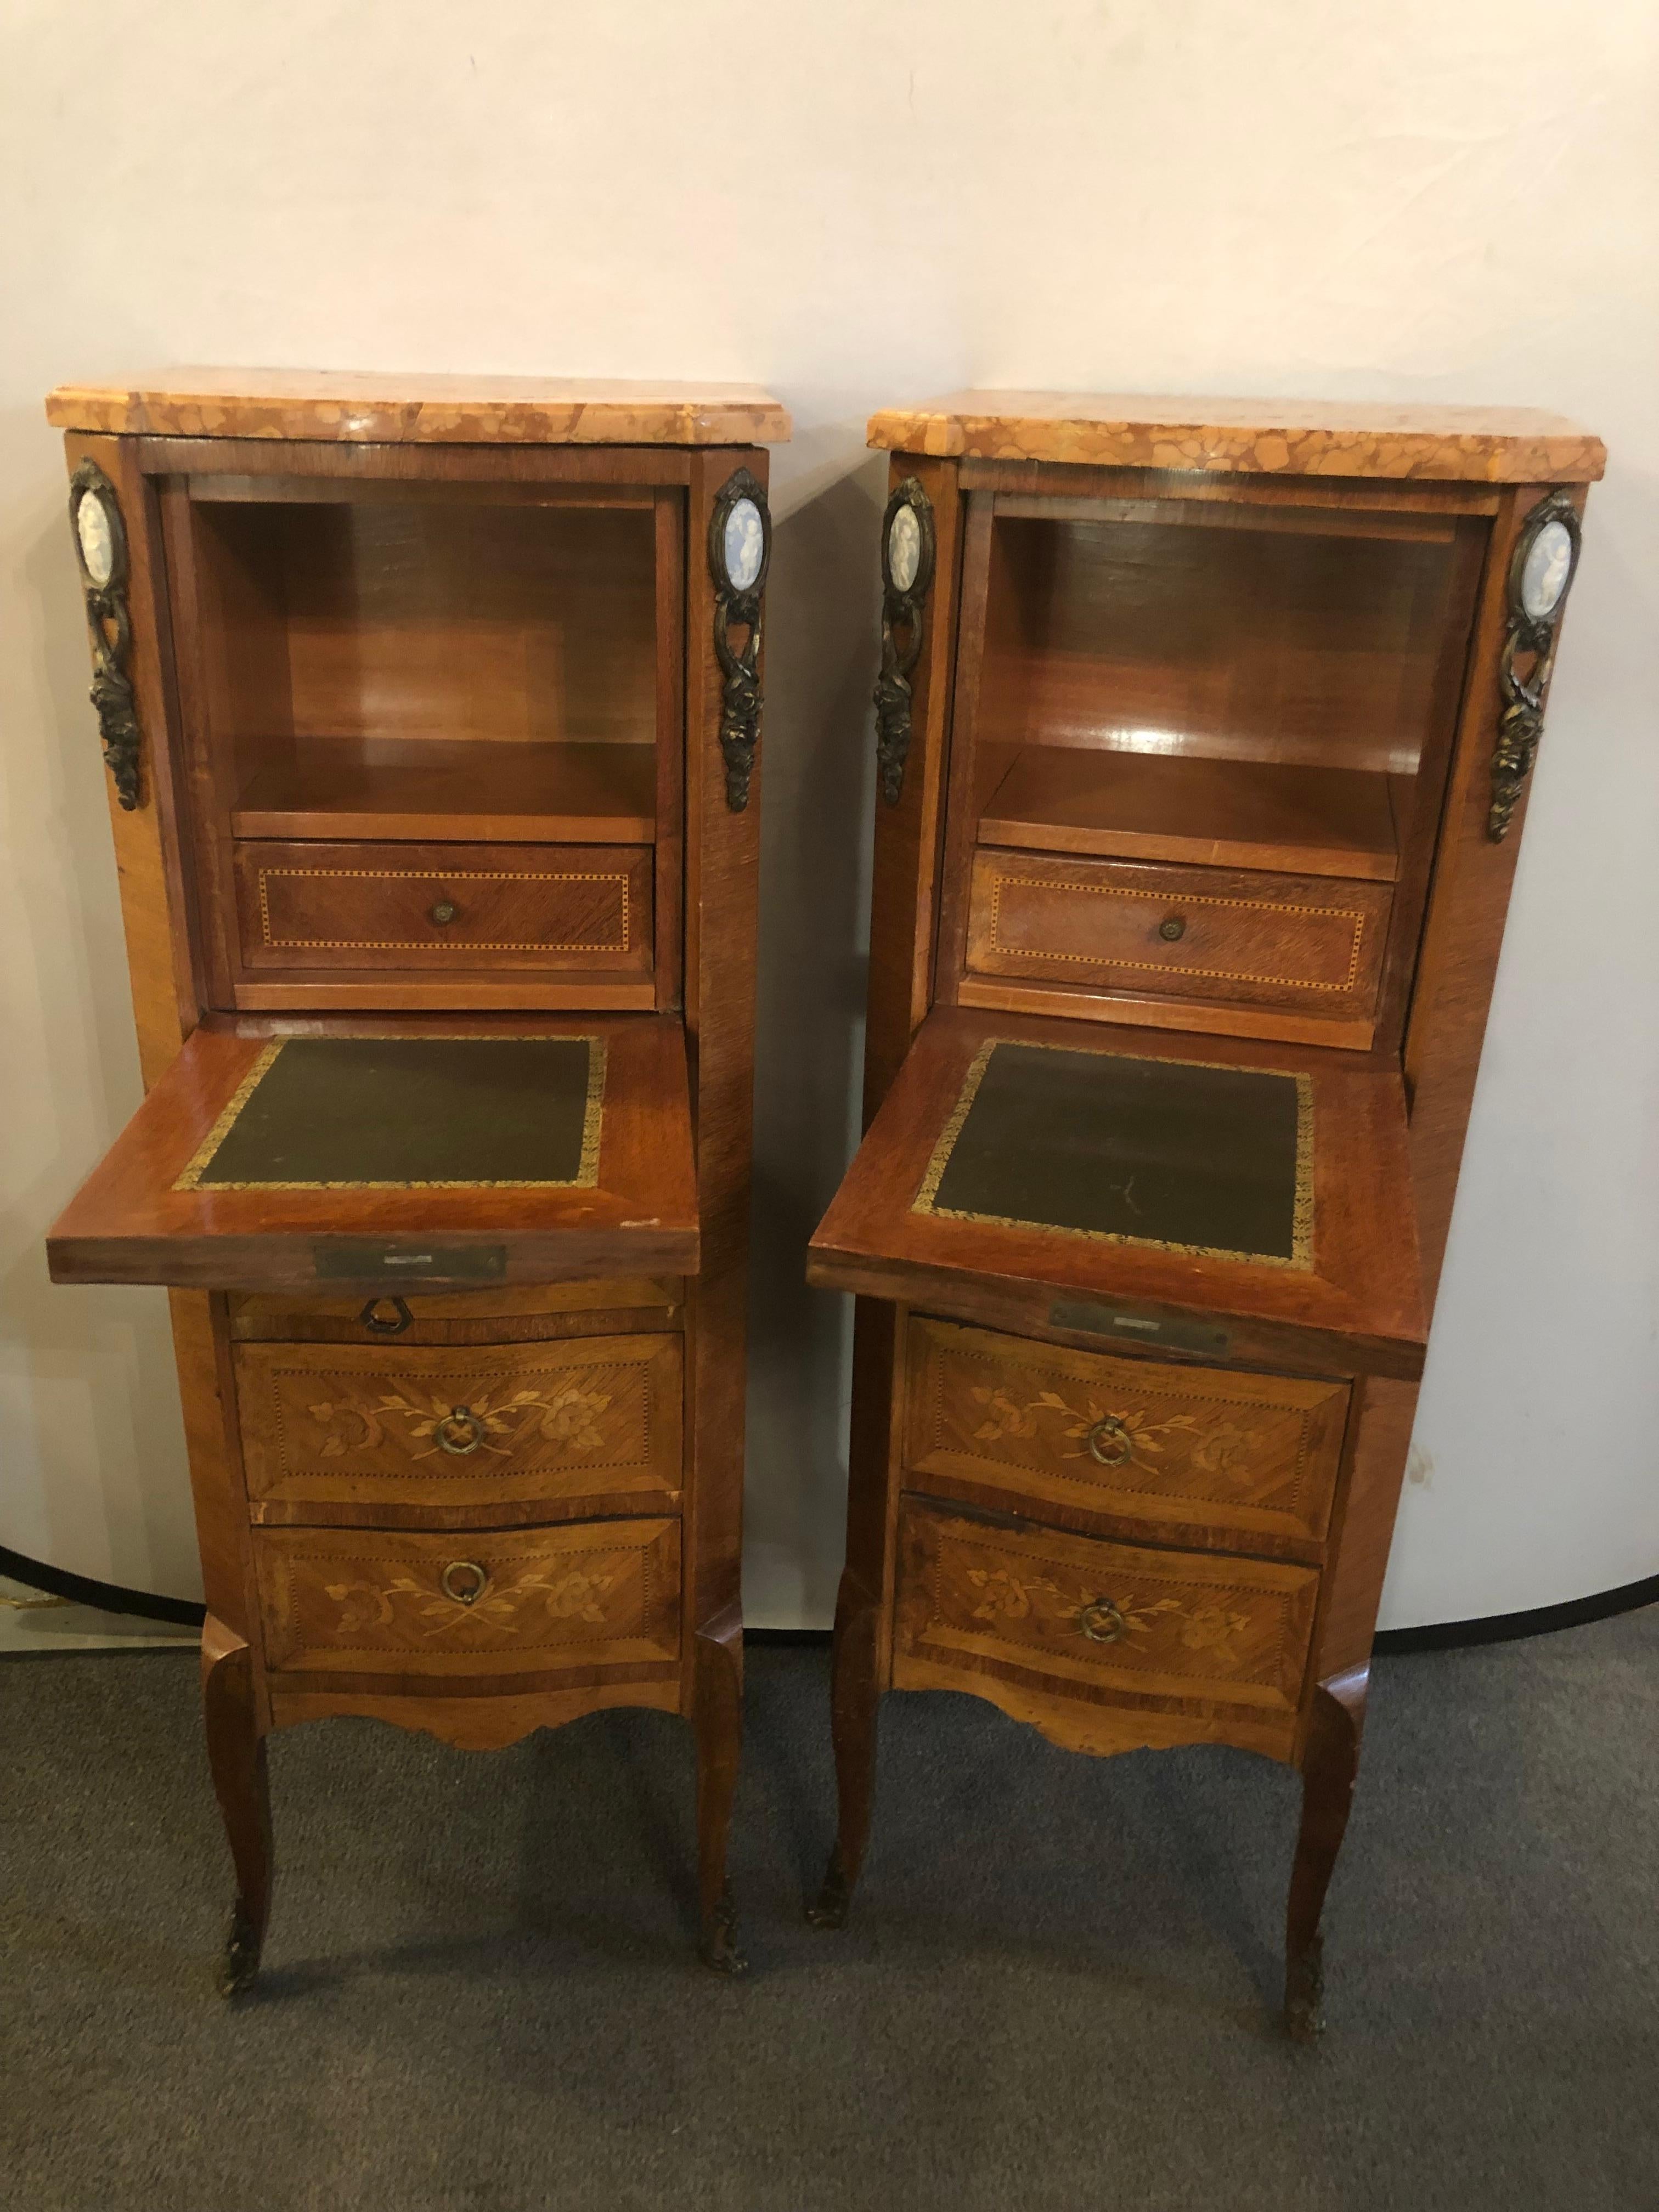 Pair of Louis XV style inlaid secretaries a abattant having rouge marble tops with fall front writing boards. These wonderful late 19th or early 20th century lingerie chests each have three finely floral inlaid drawer fronts under a pull down desk